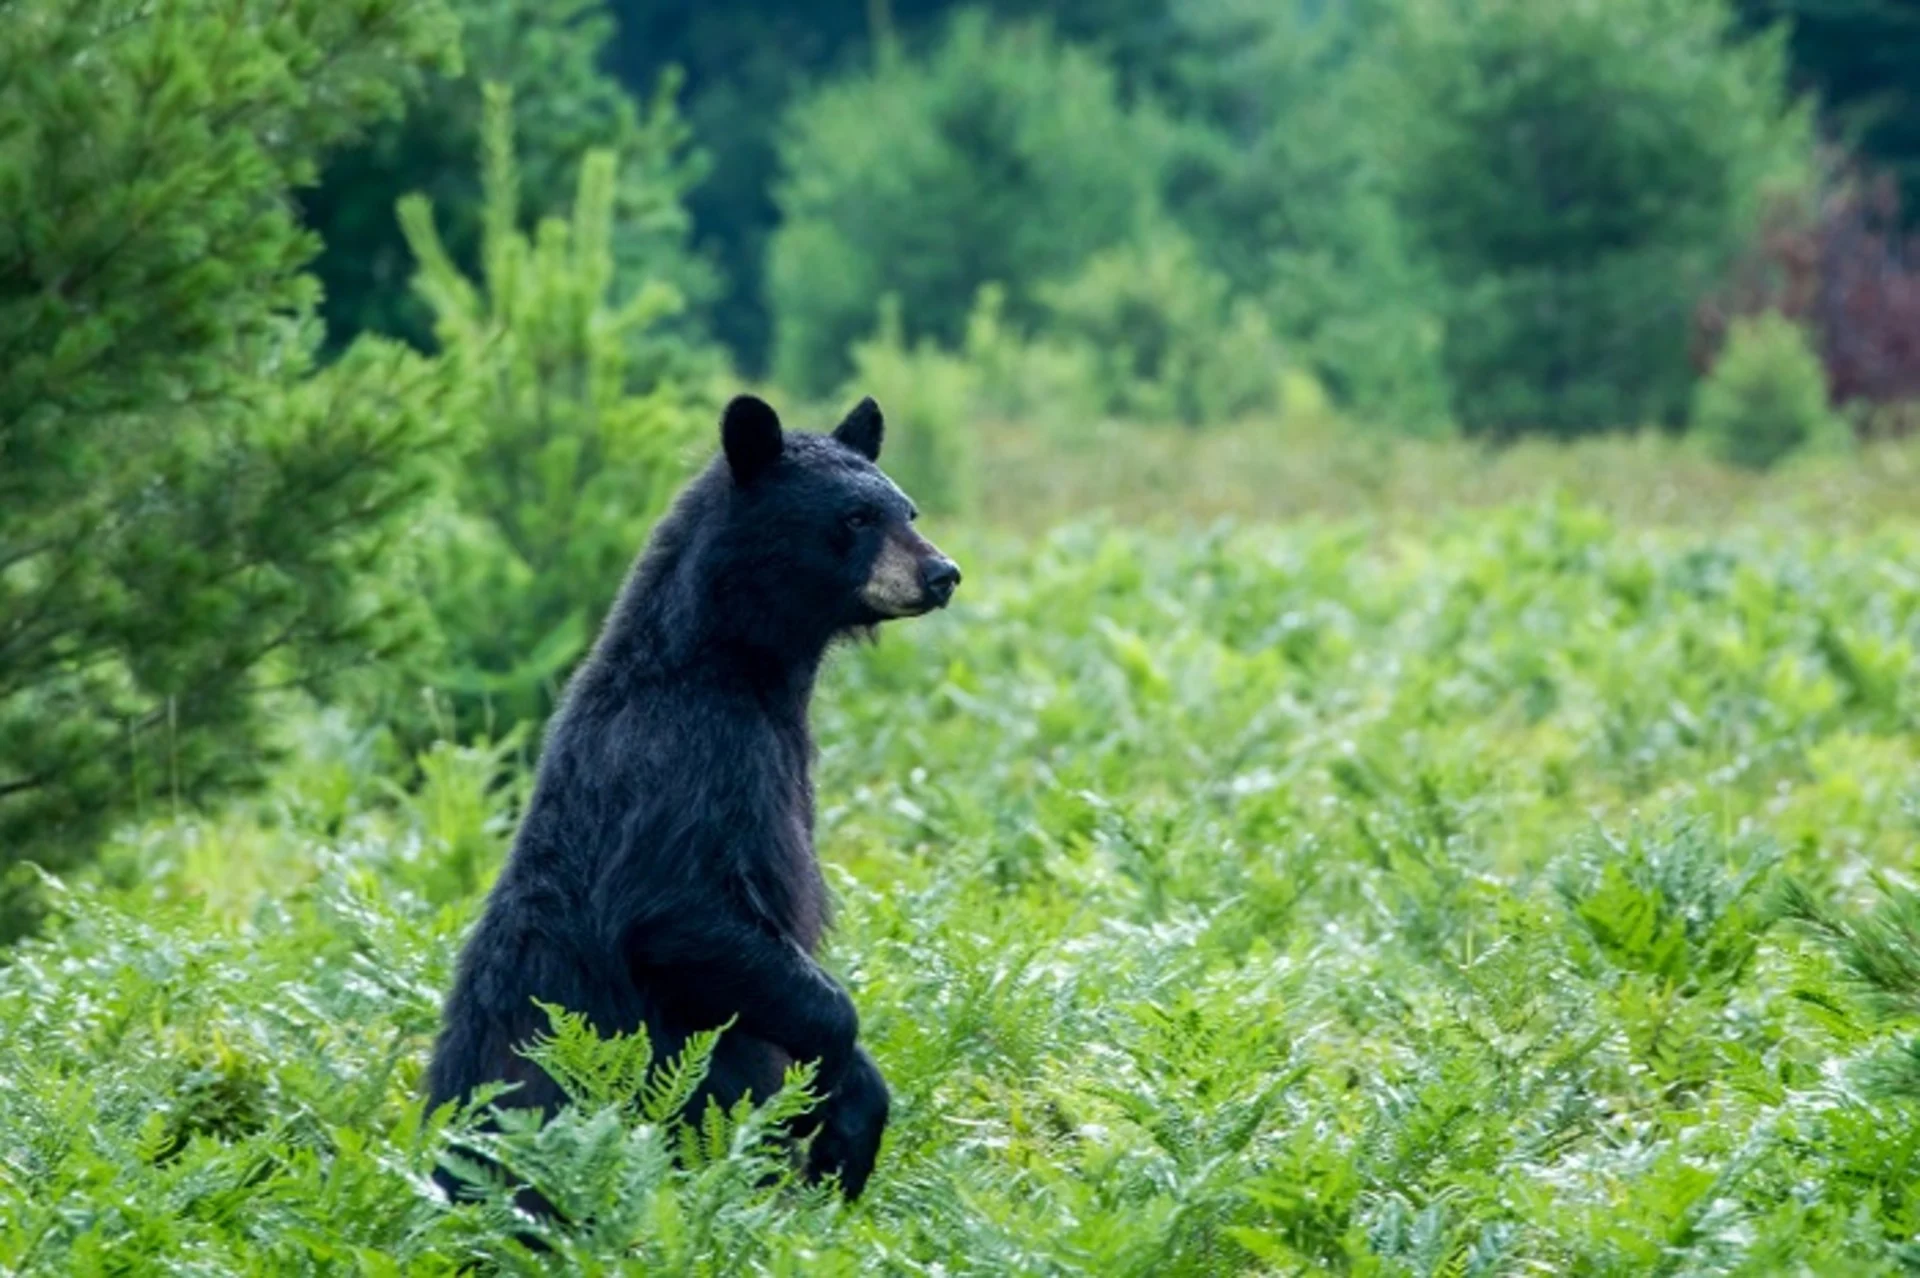 Hungry bears roaming for food may find your bird feeder appealing